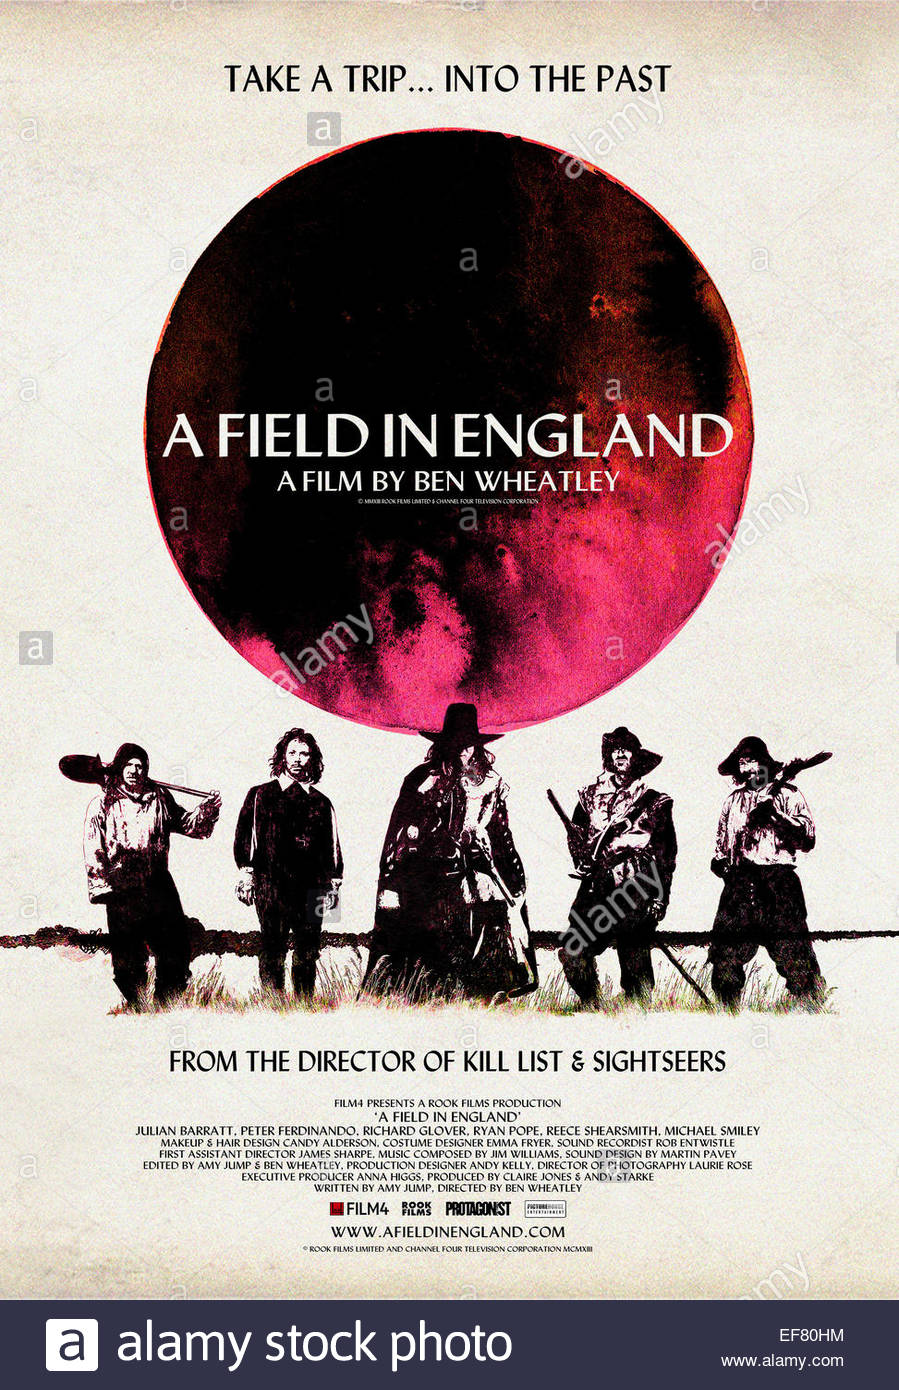 movie-poster-a-field-in-england-2013-EF80HM.jpg